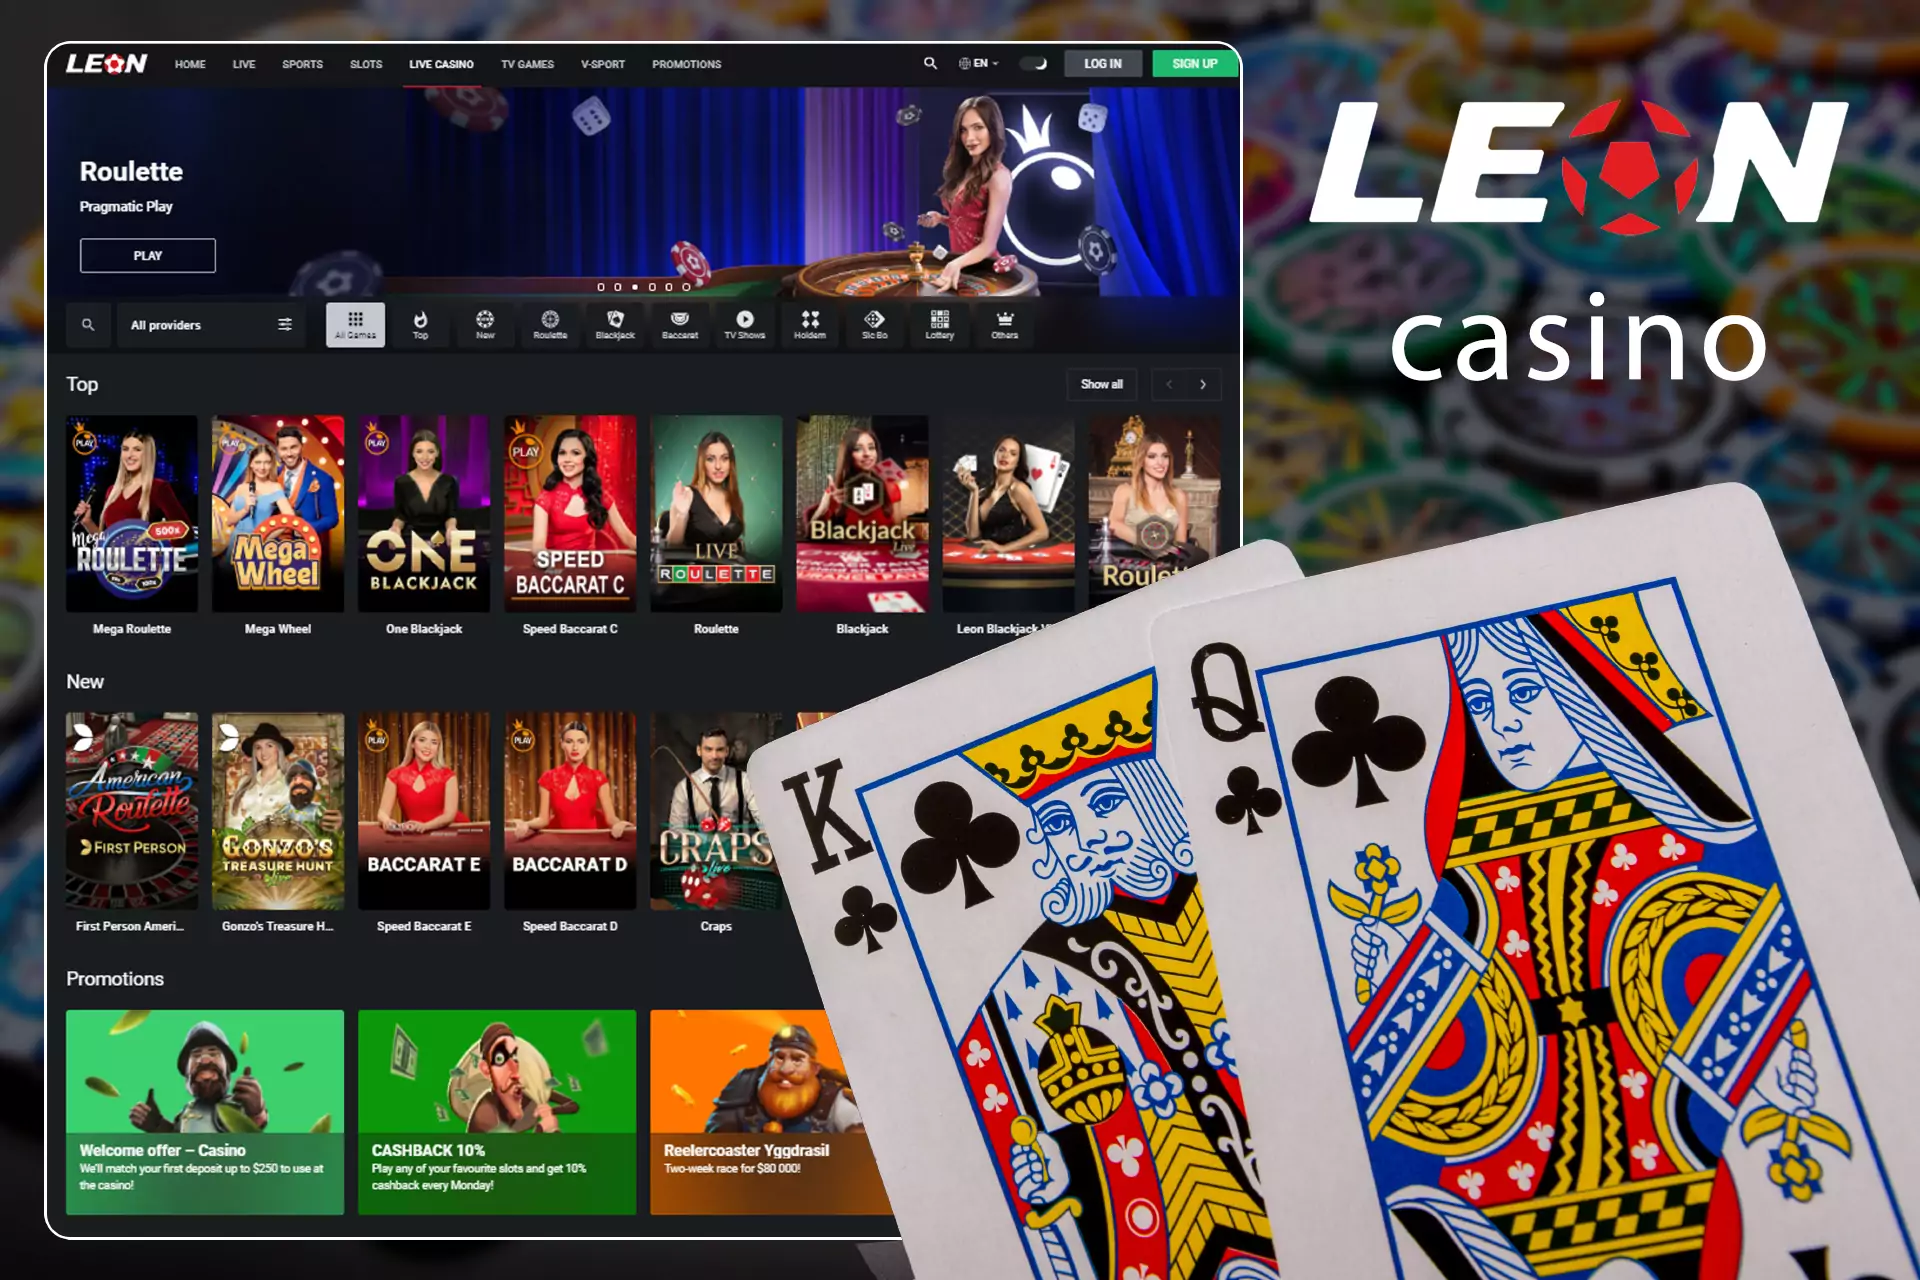 If you like slots and other games, go to the 'Live Casino' section.